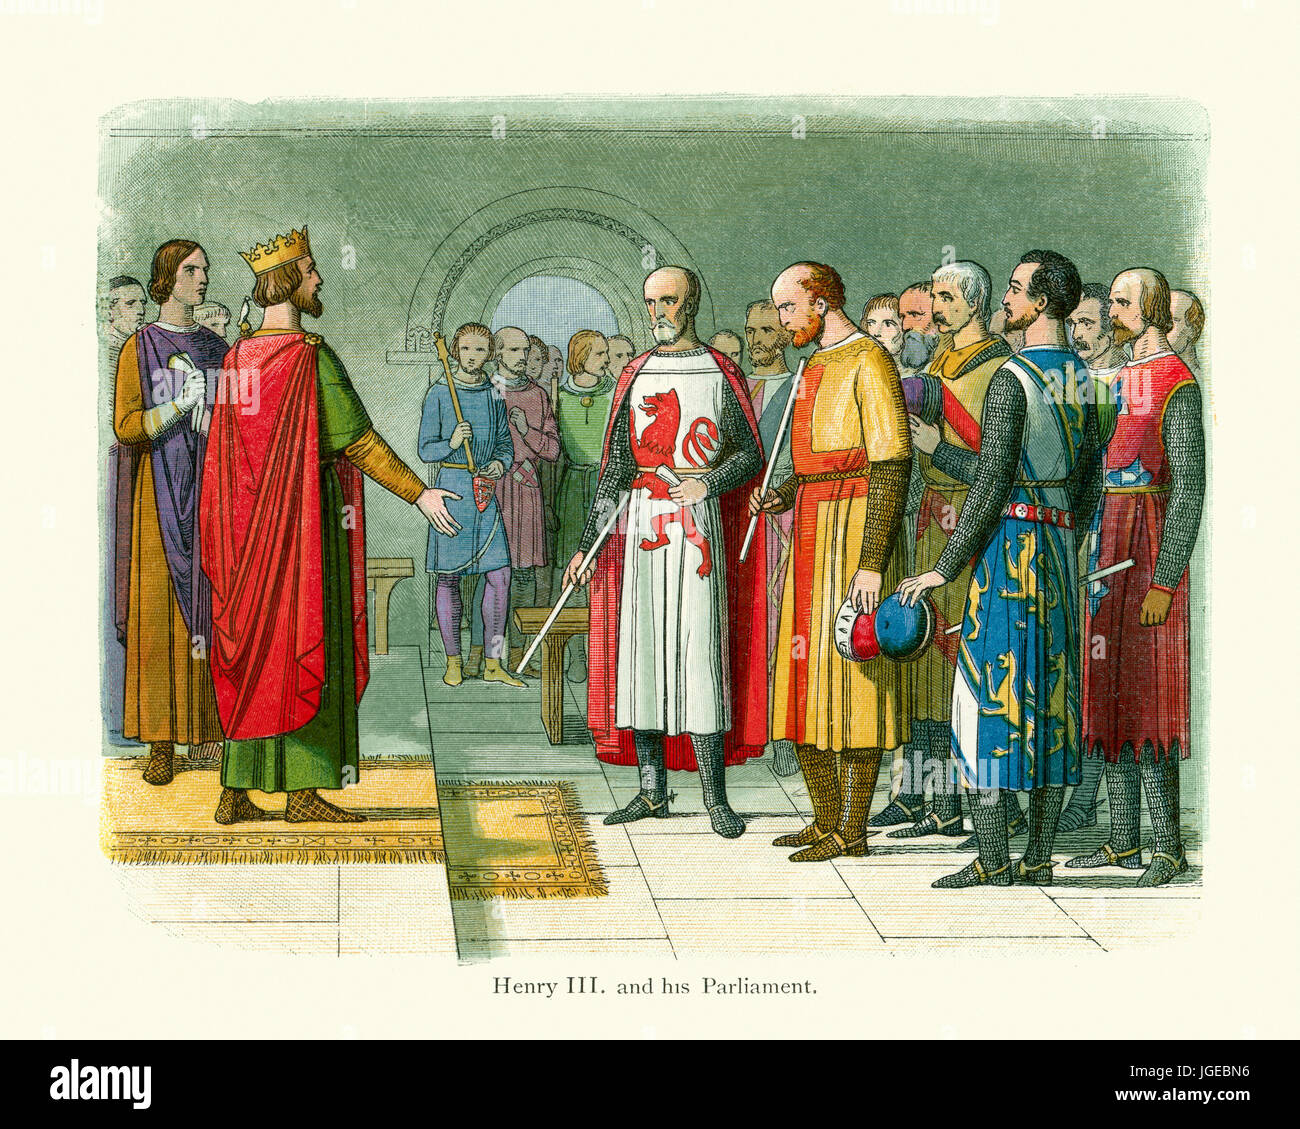 Vintage colour lithograph from 1864 showing King Henry III and his Parliament. Henry III (1 October 1207 to 16 November 1272) was the son and successo Stock Photo